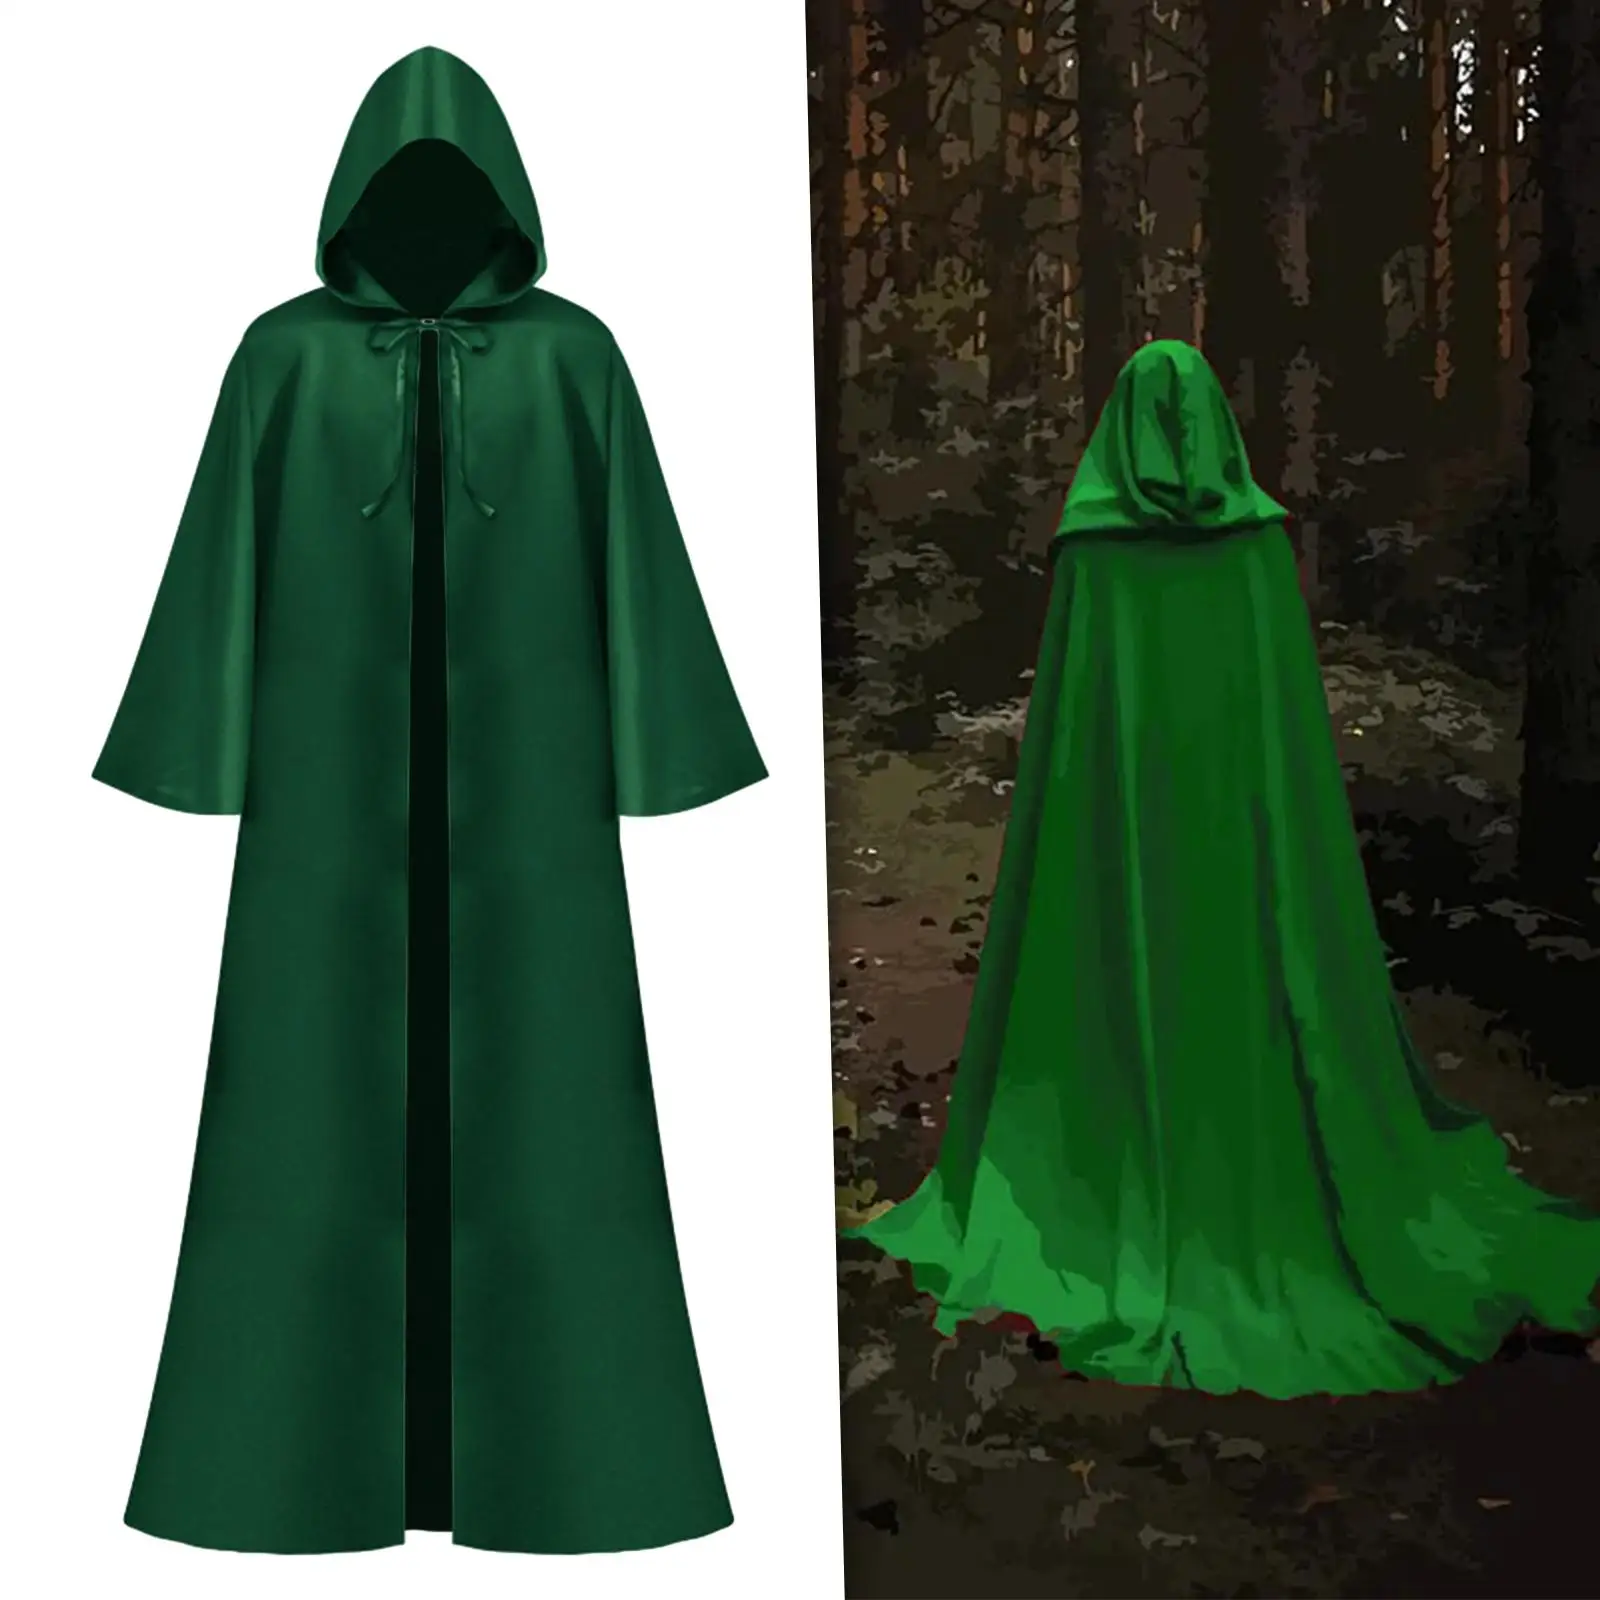 Halloween Cloak, Long Hooded Cloak, Gothic Cowl Cosplay Cape, Masquerade Dress up for Vintage, Gathering Fancy Dress, Party